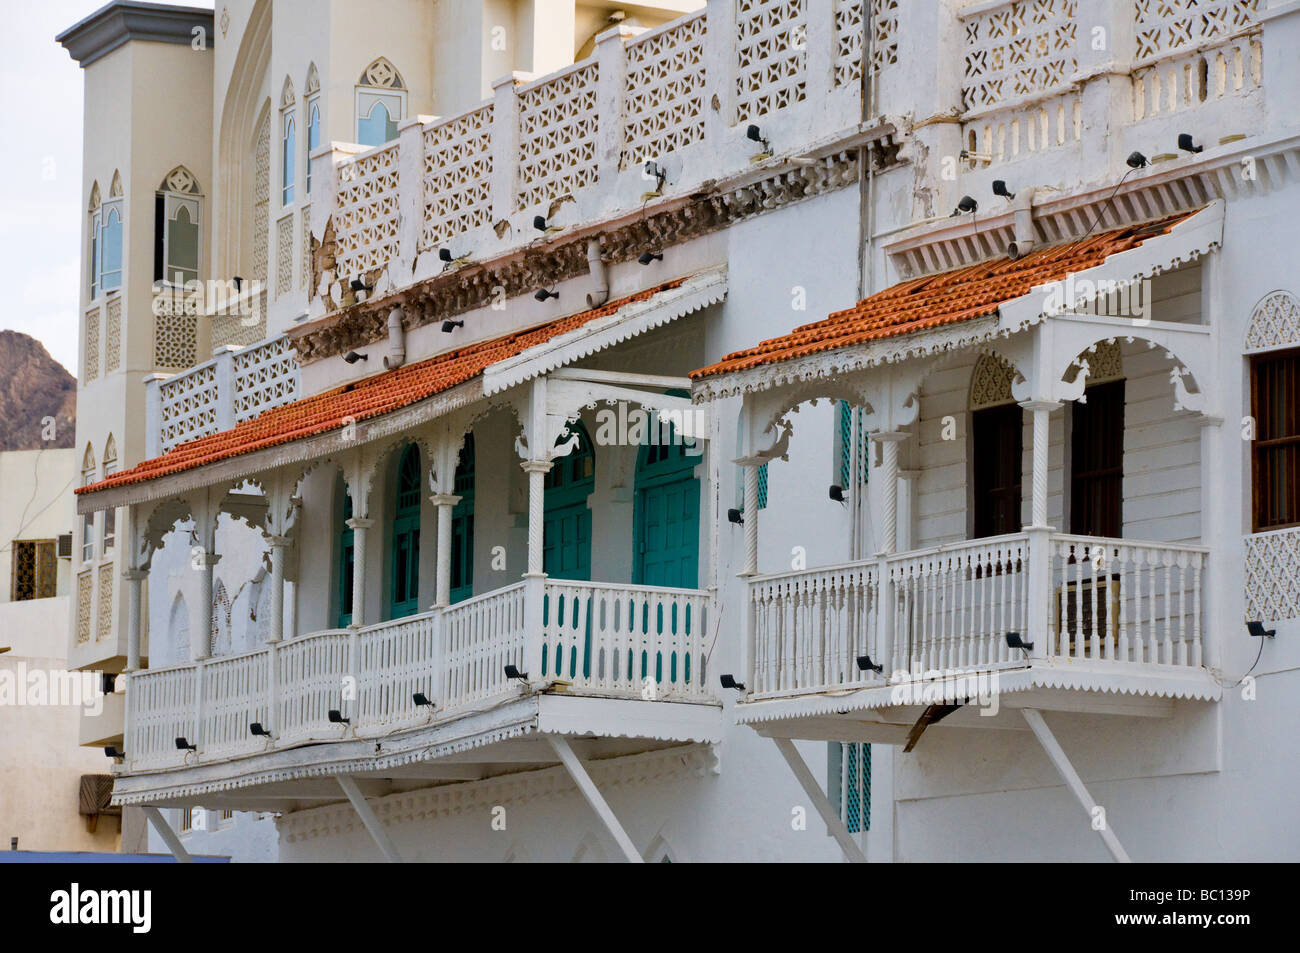 Traditional Arab architecture along the Mutrah waterfront Muscat Oman Stock Photo